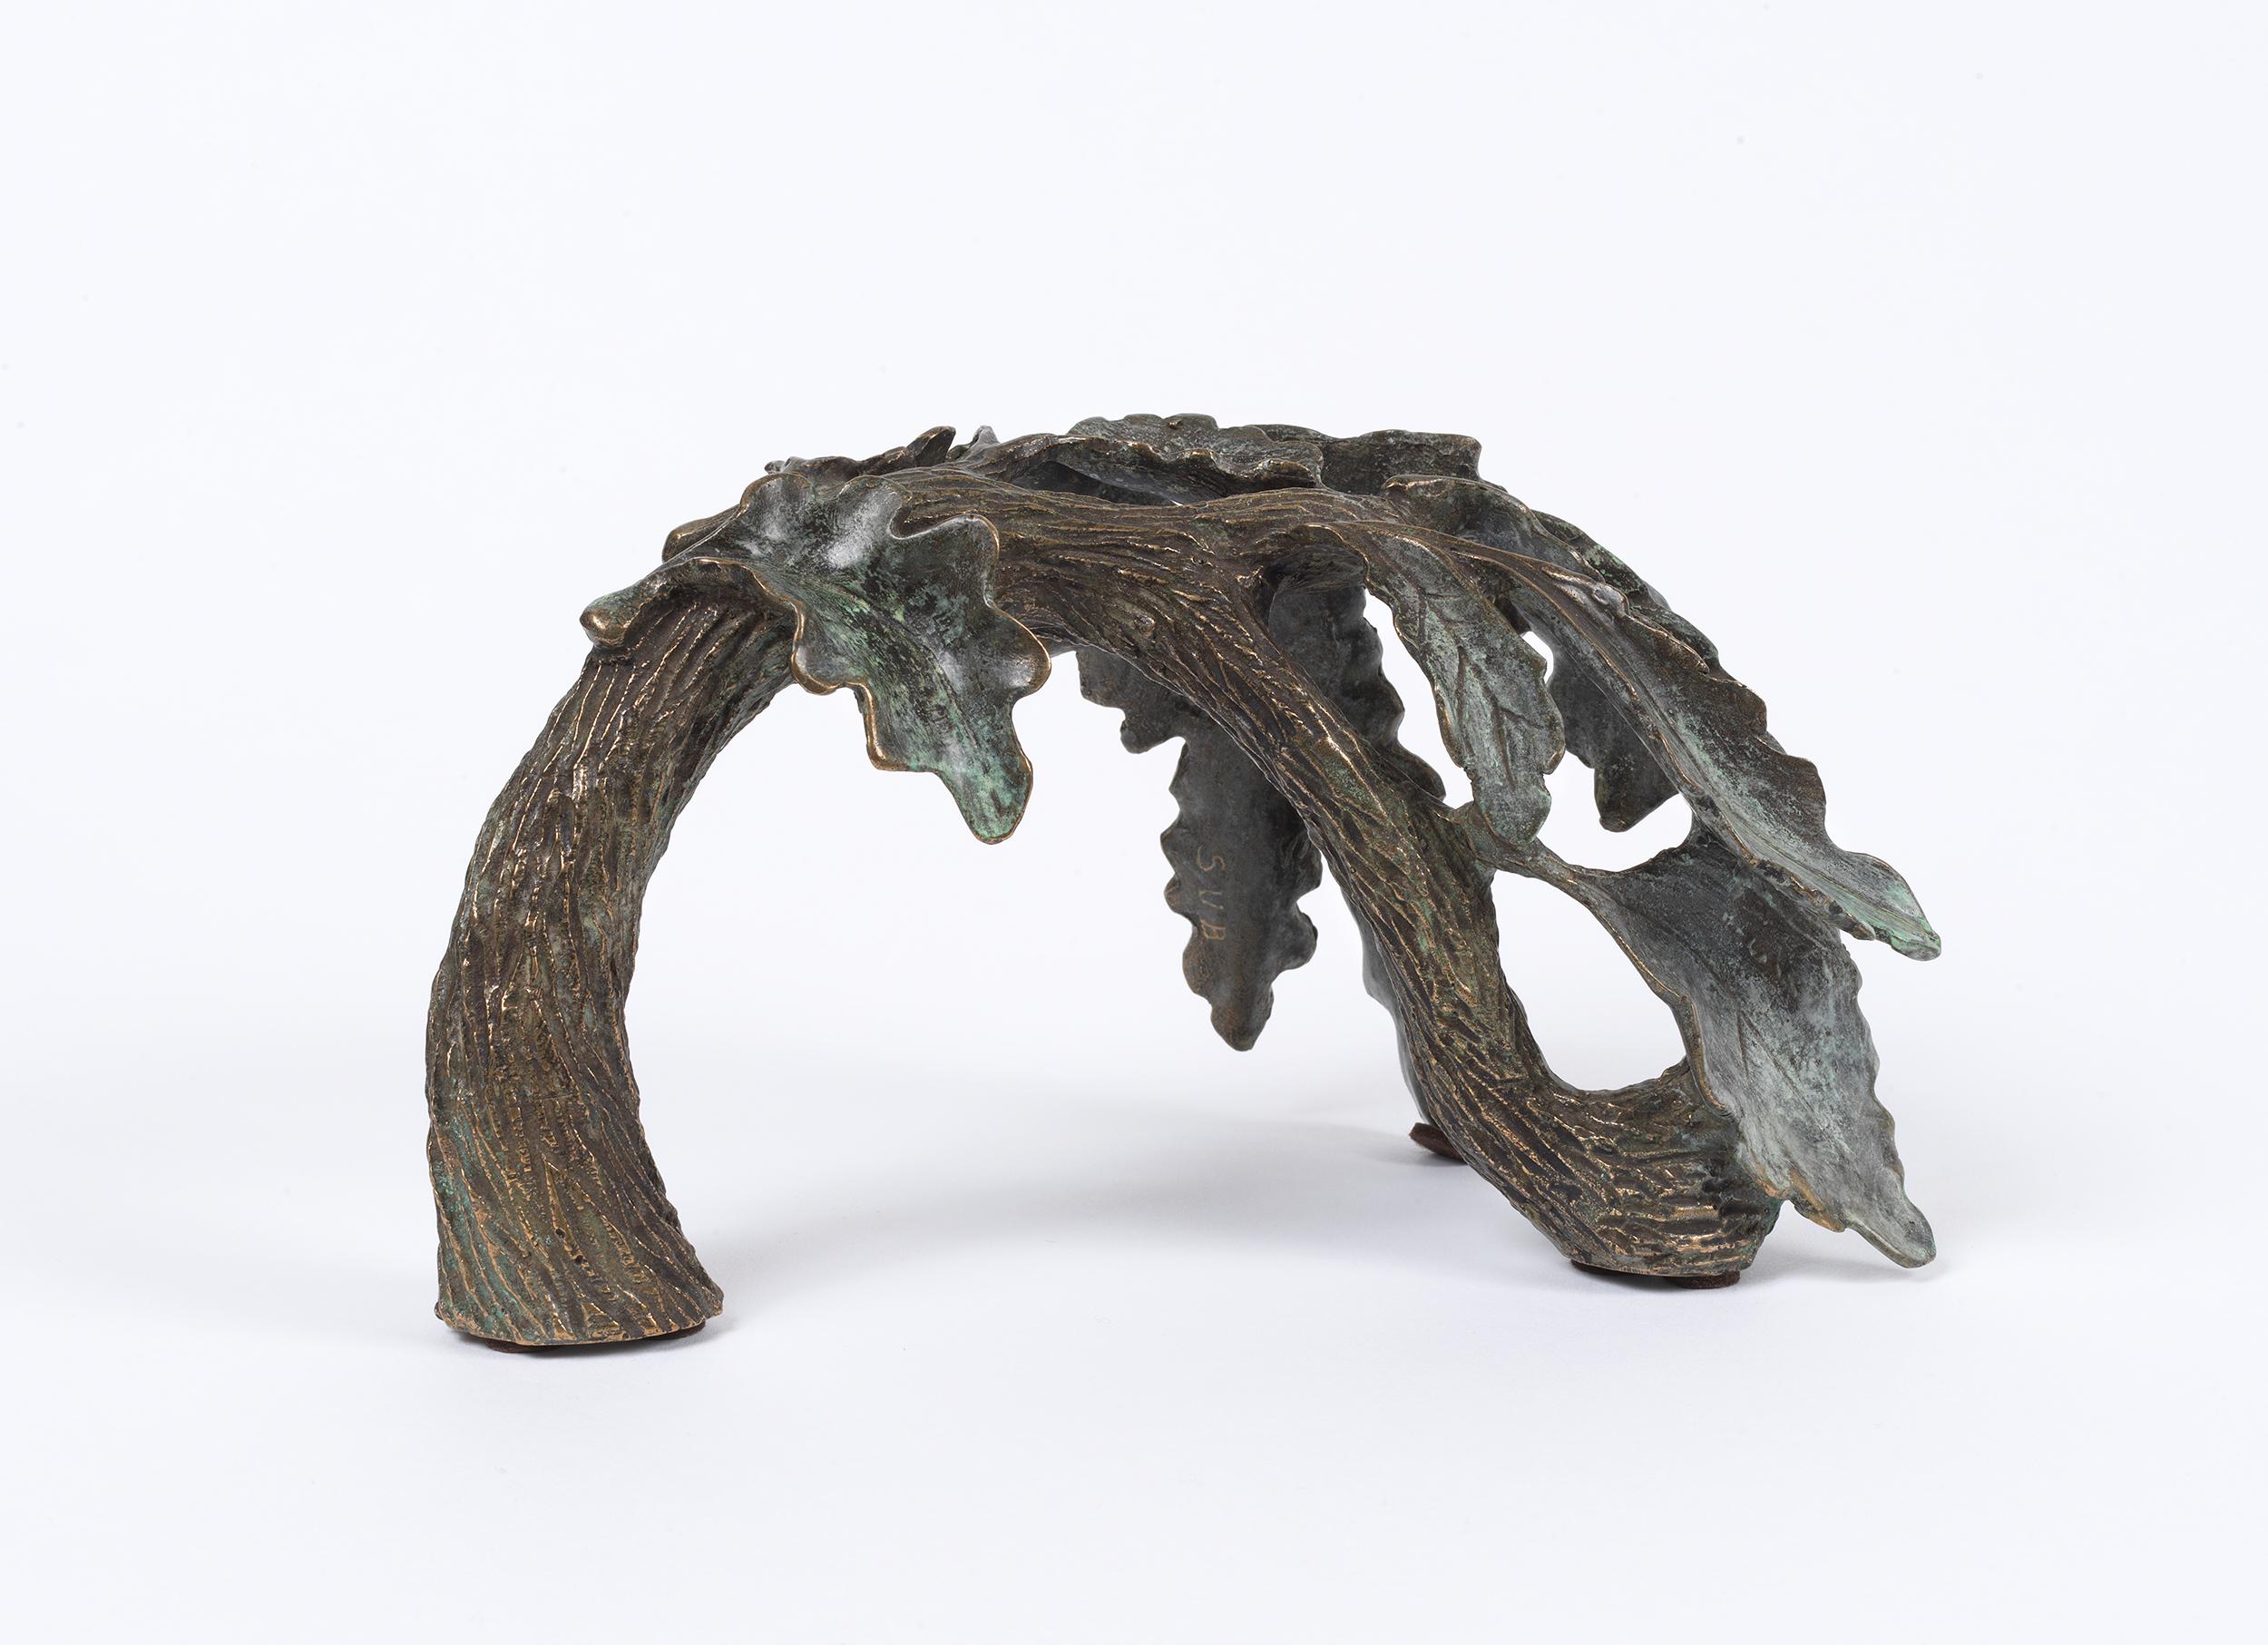 A beautiful branch of oak leaves cast in bronze. Made with the ancient lost wax method, a process dating back to the 3rd millennium BC, in which the oak leaves are carved in wax then set in clay. The wax is then melted and drained out leaving a